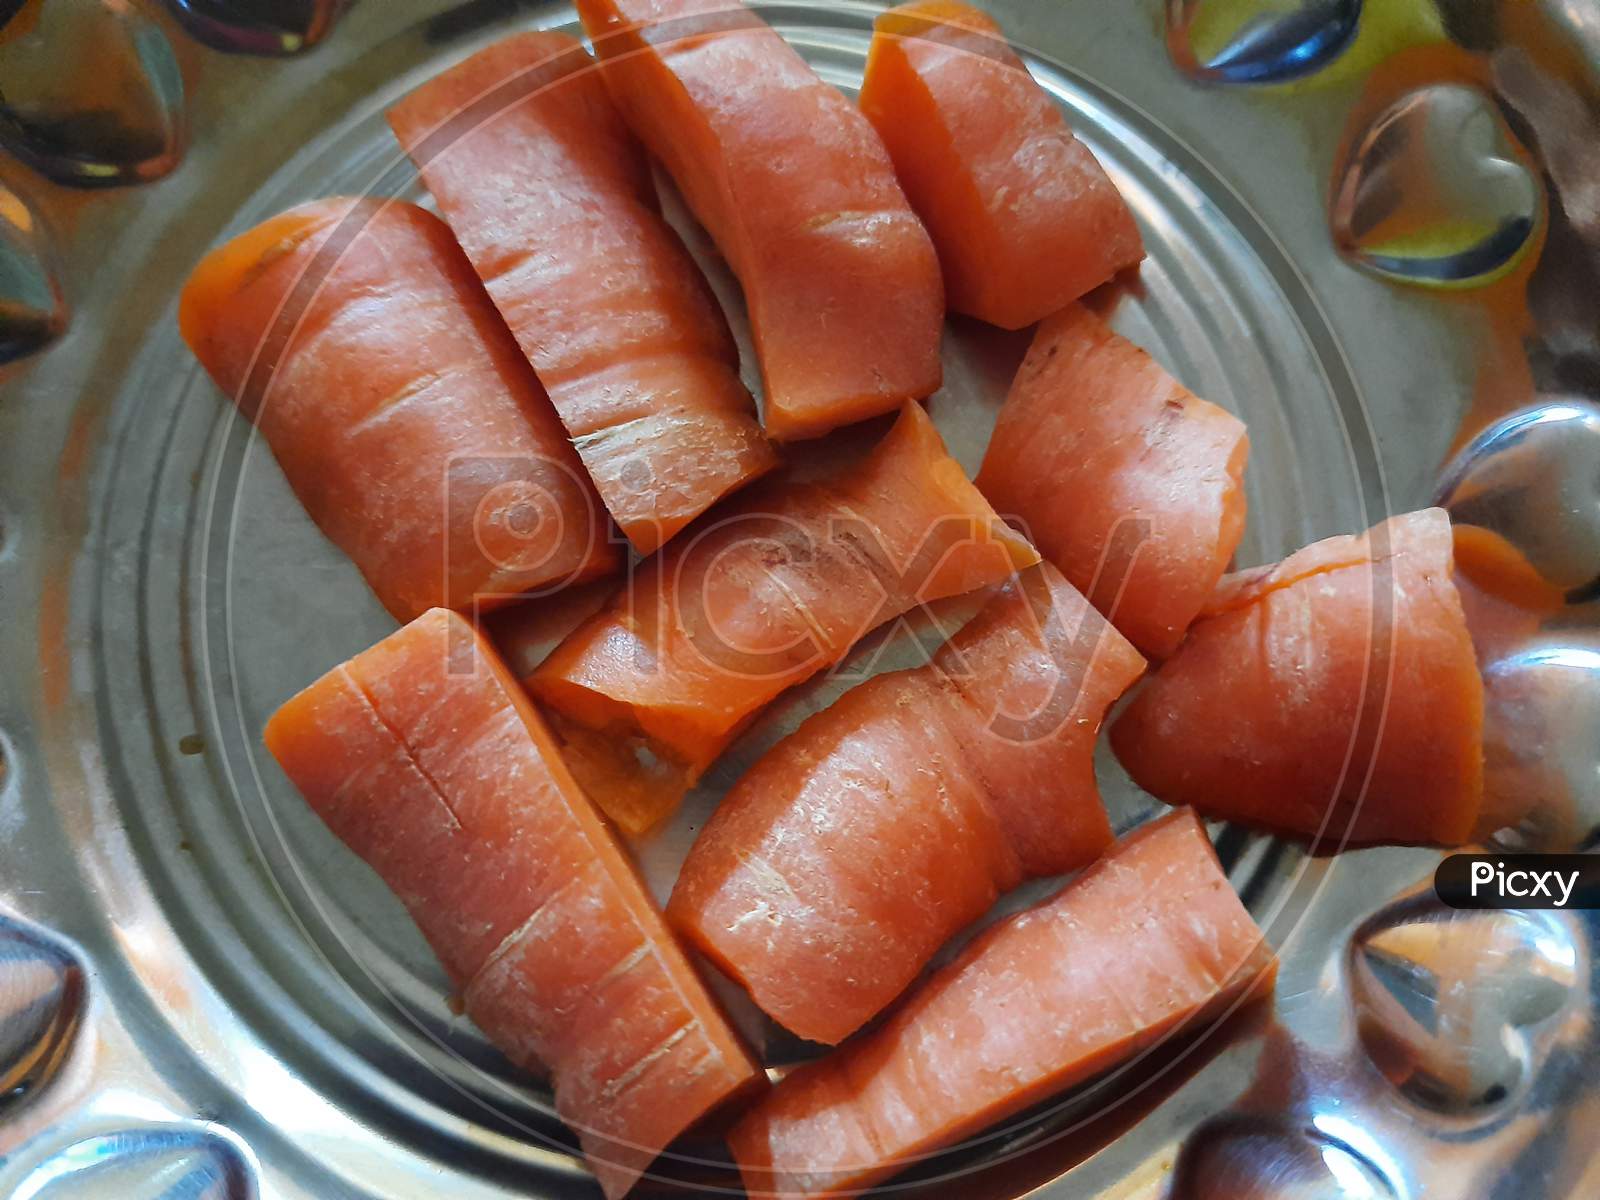 Image of carrot slices